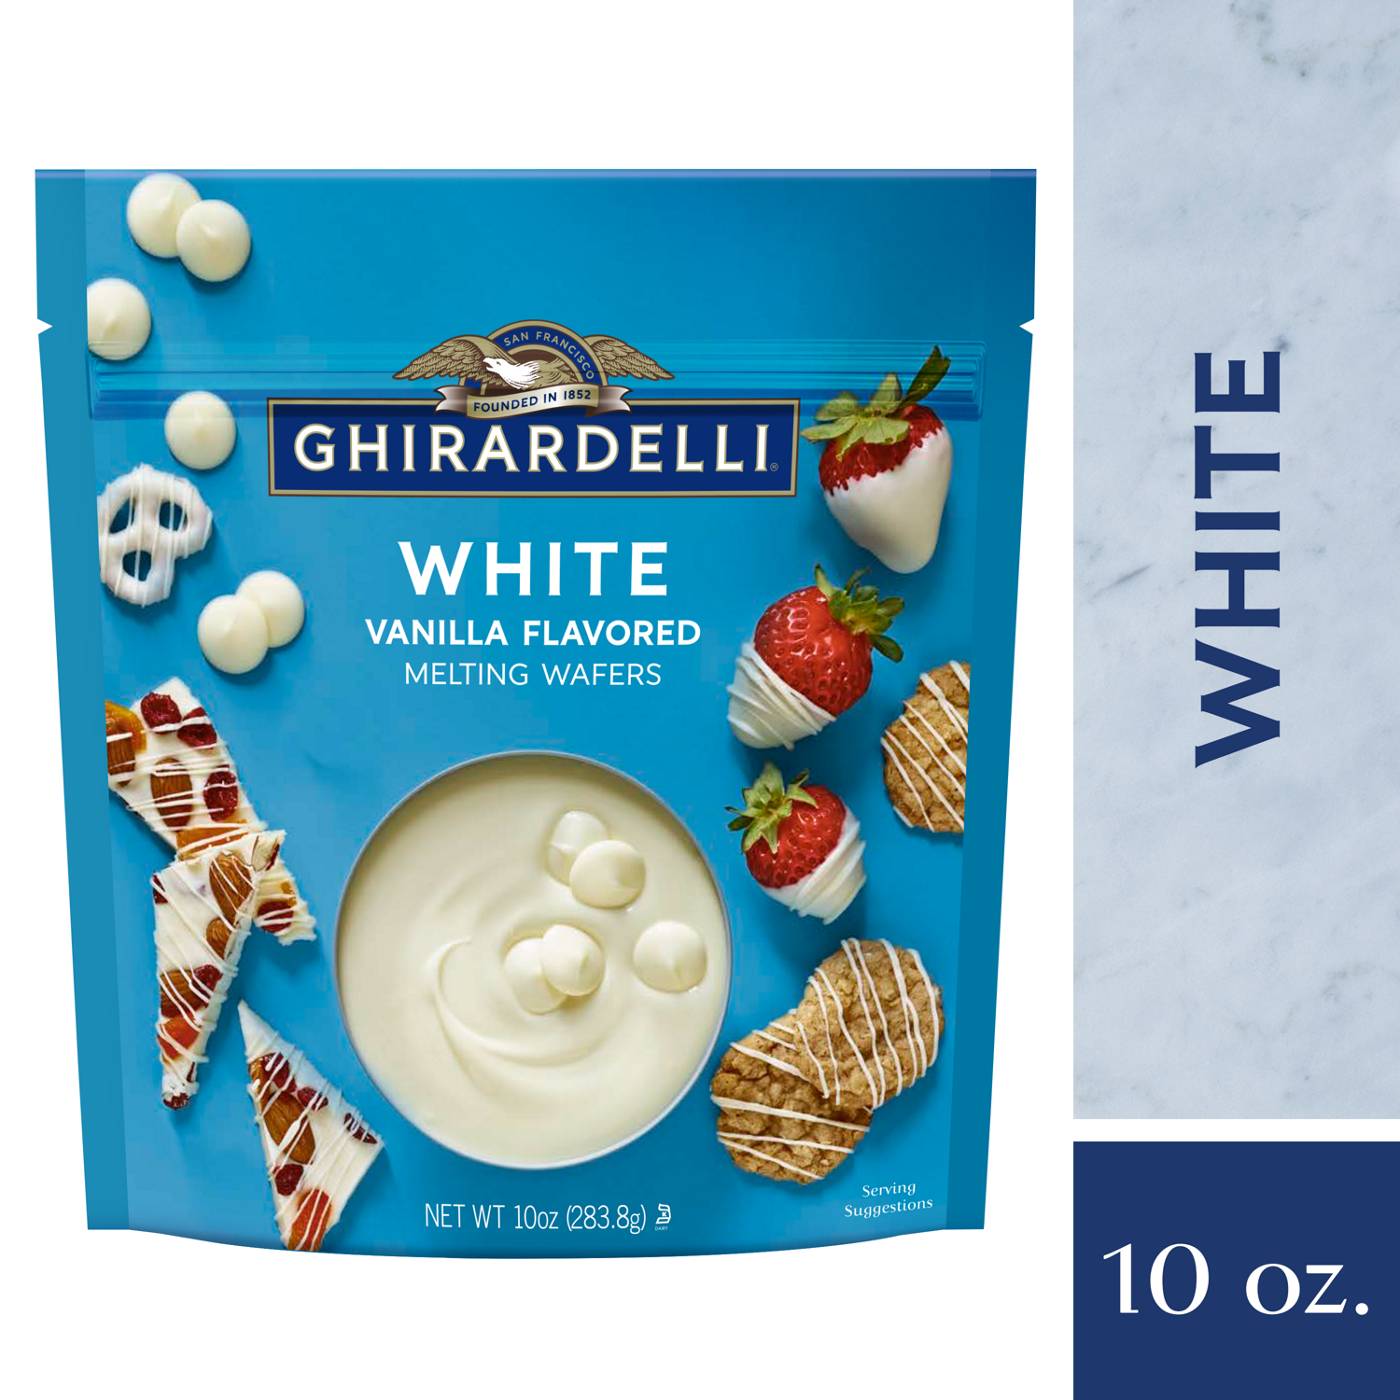 Ghirardelli White Vanilla Flavored Melting Wafers; image 7 of 7